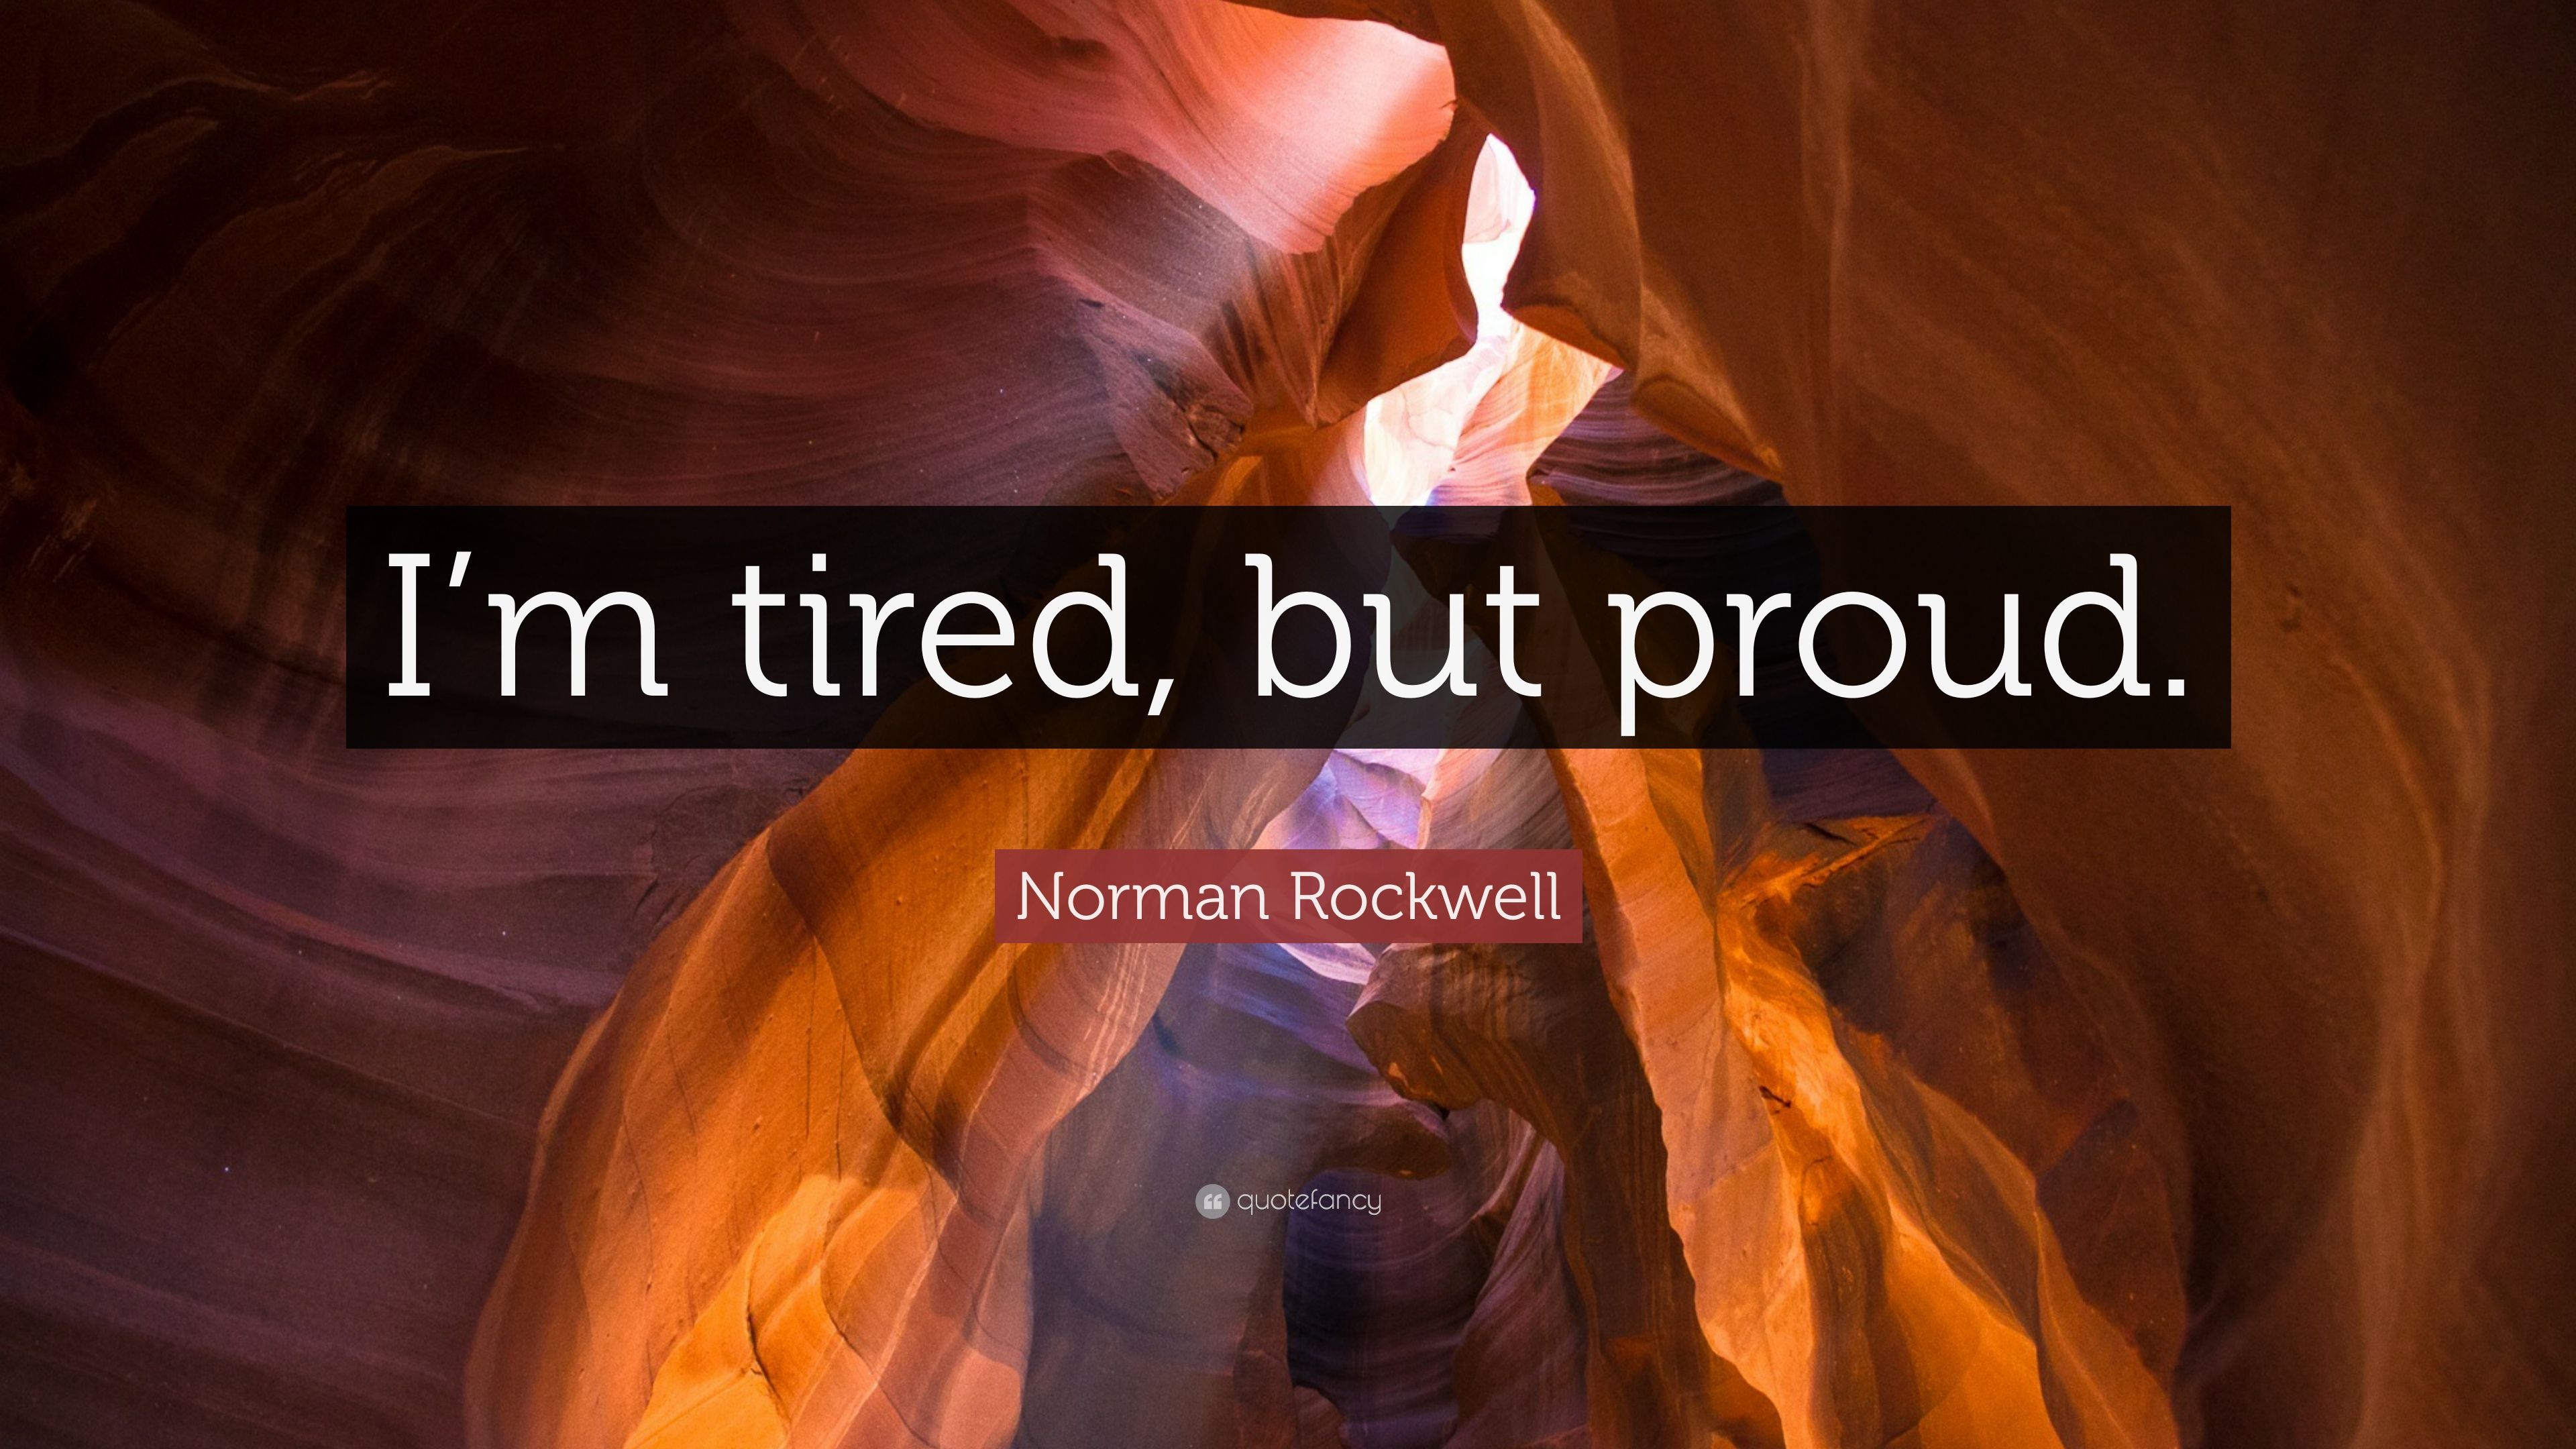 Norman Rockwell Quote: “I'm tired, but proud.” 9 wallpaper